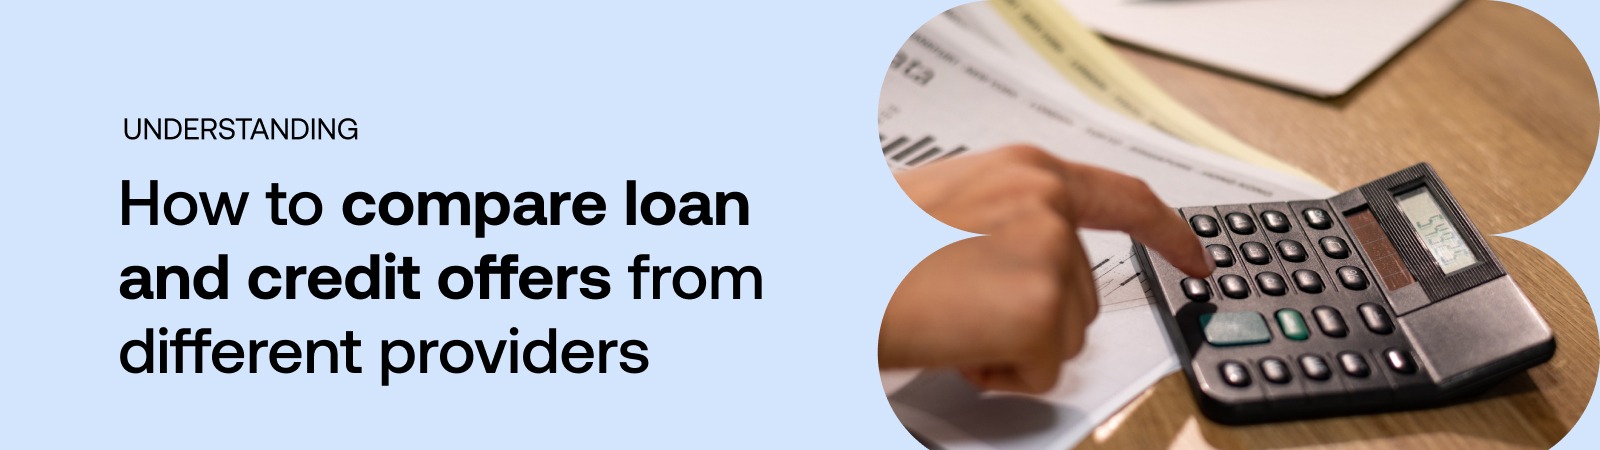 compare loan and credit offers